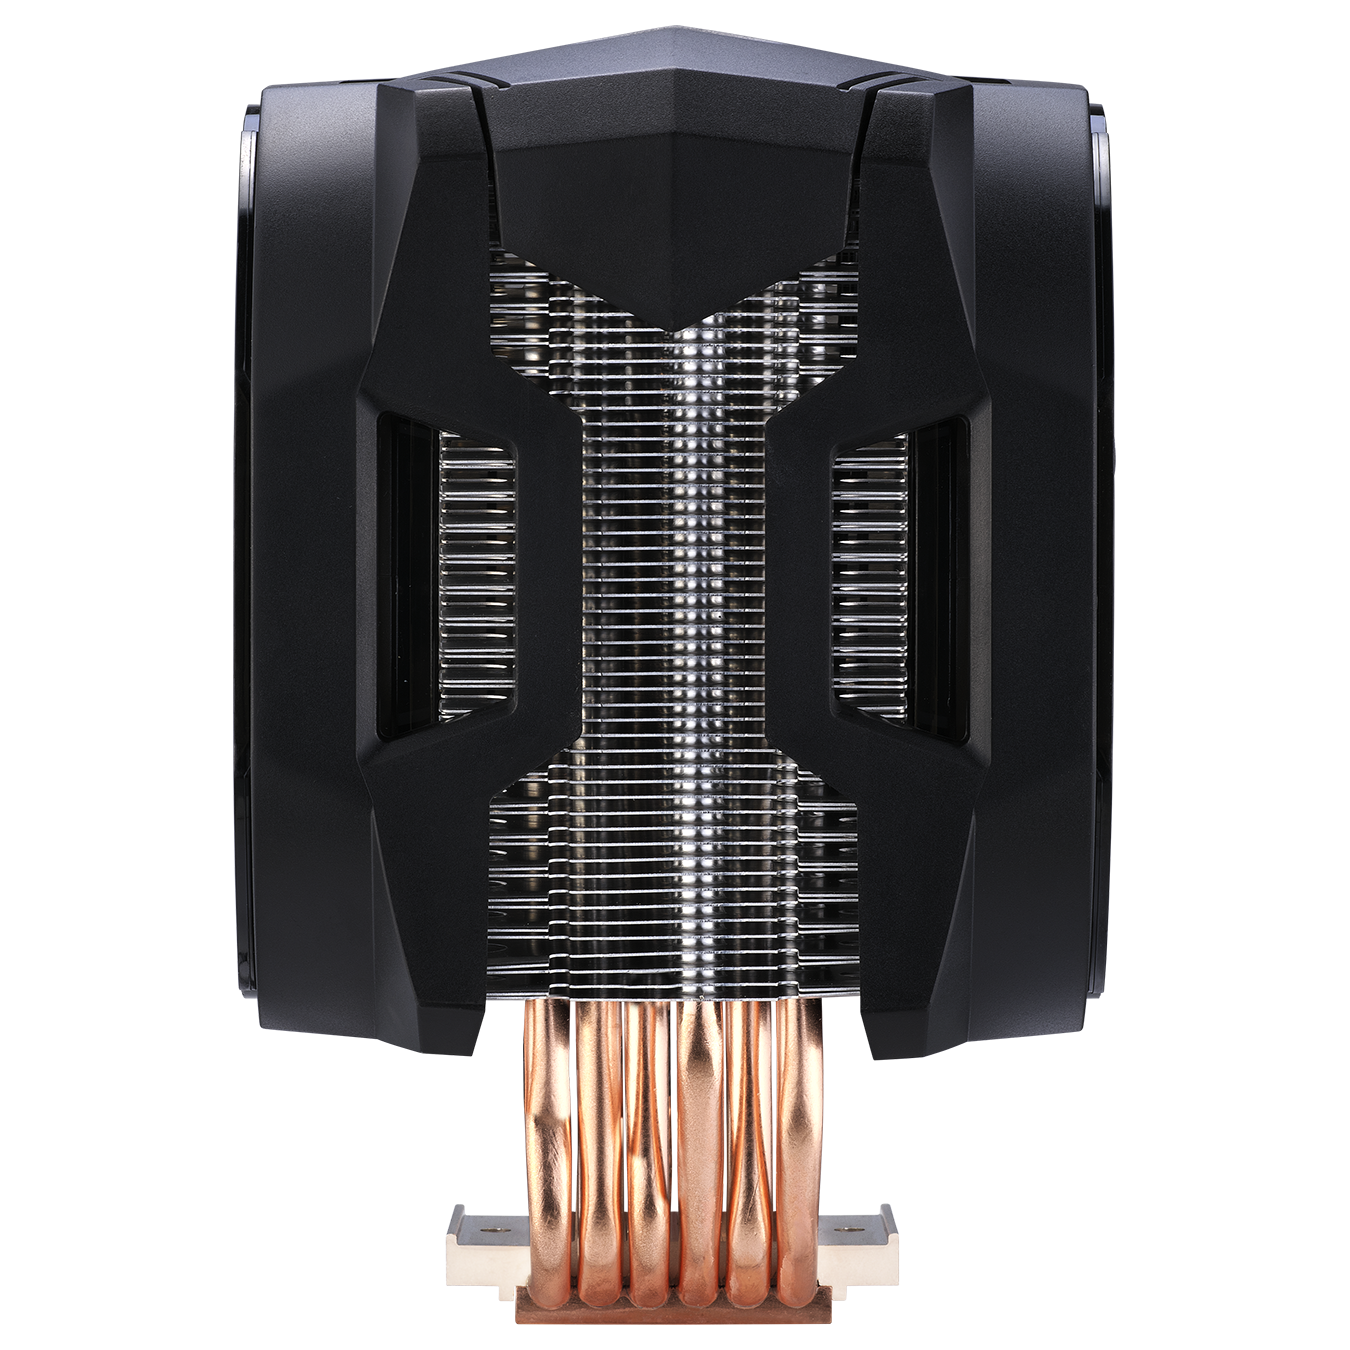 Uniform heat pipe layout transfers heat evenly and quickly to the heatsink for rapid cooling of your CPU with ease